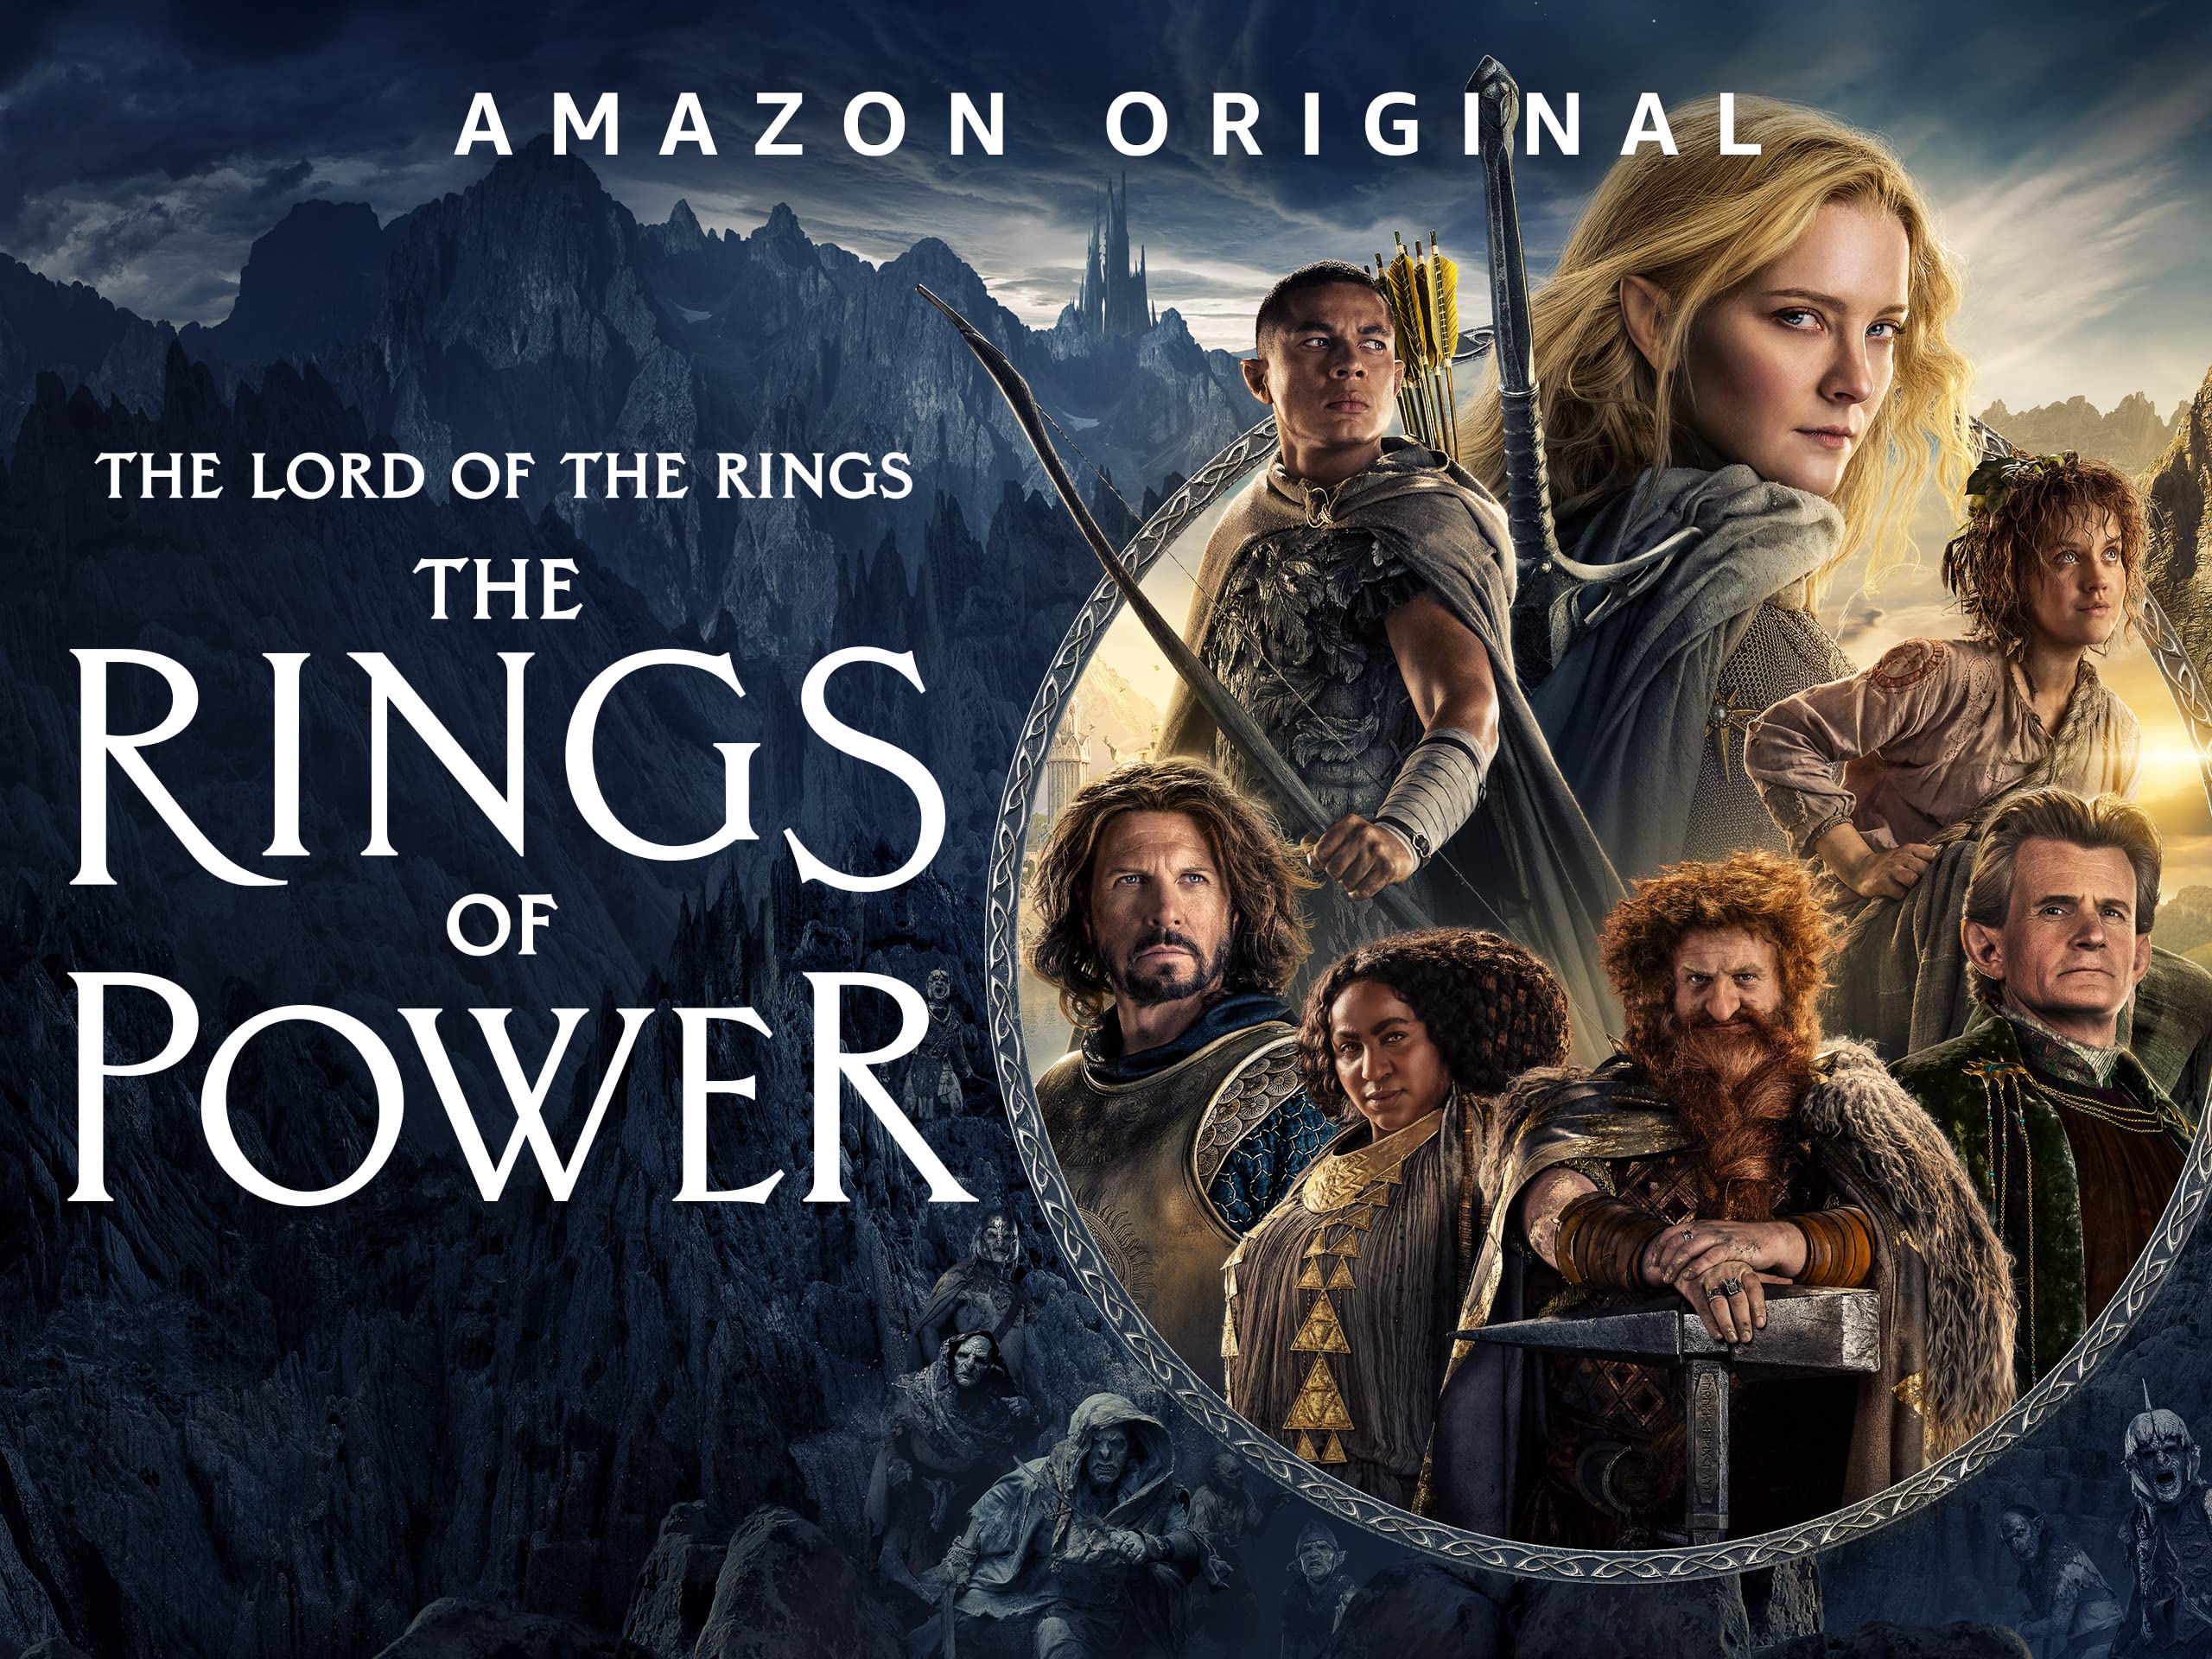 Lord of the Rings: Rings of Power Reviews and Social Reactions